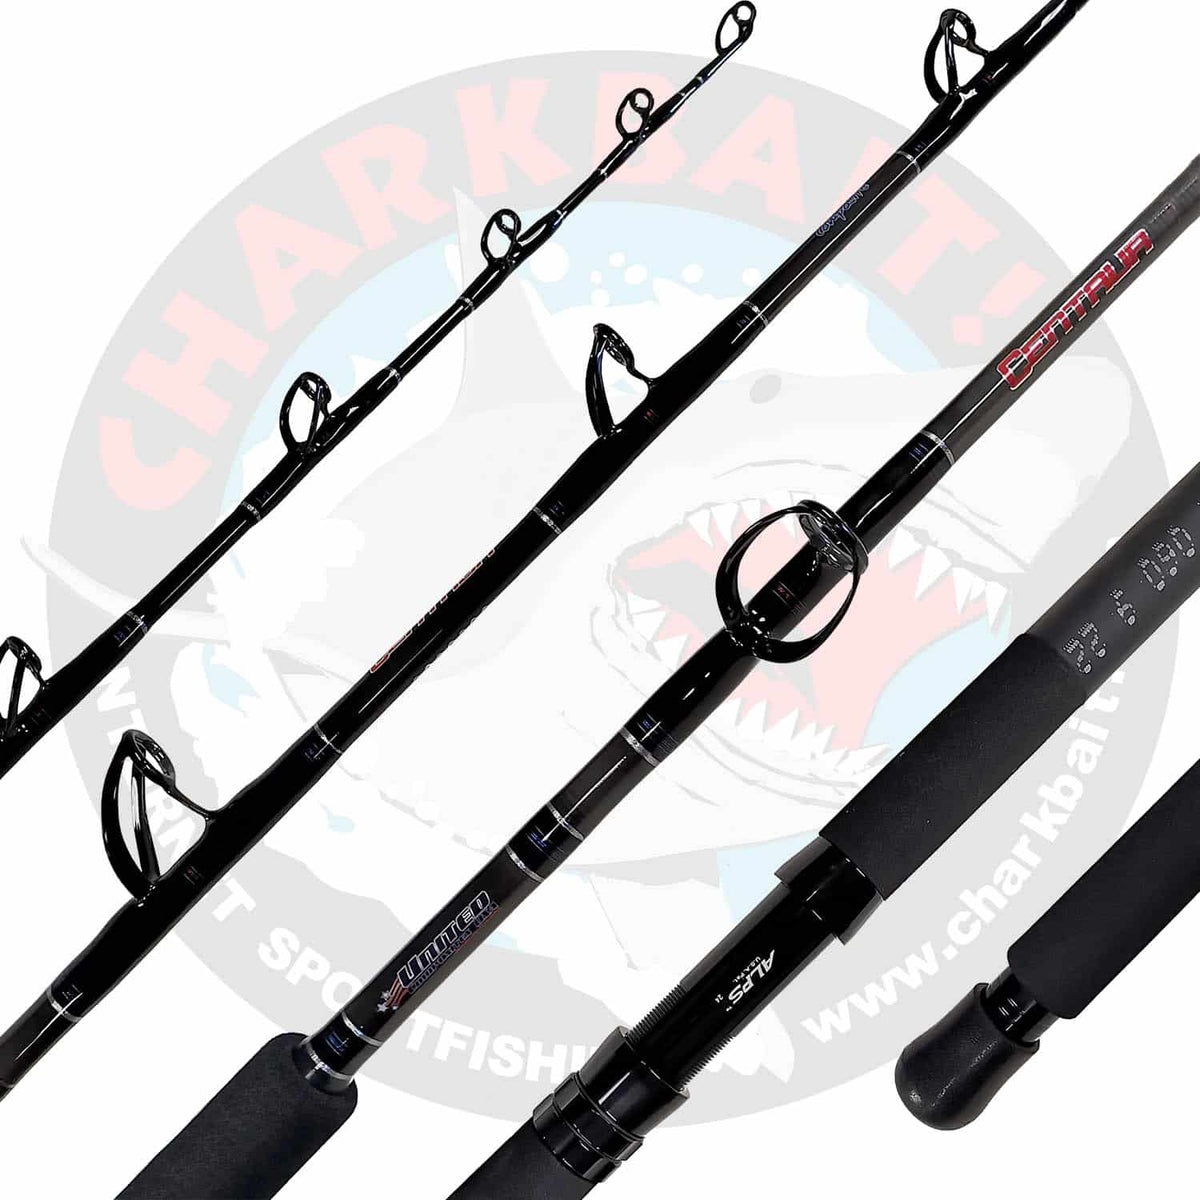 United Composites USA Blank Rods are top of the line!